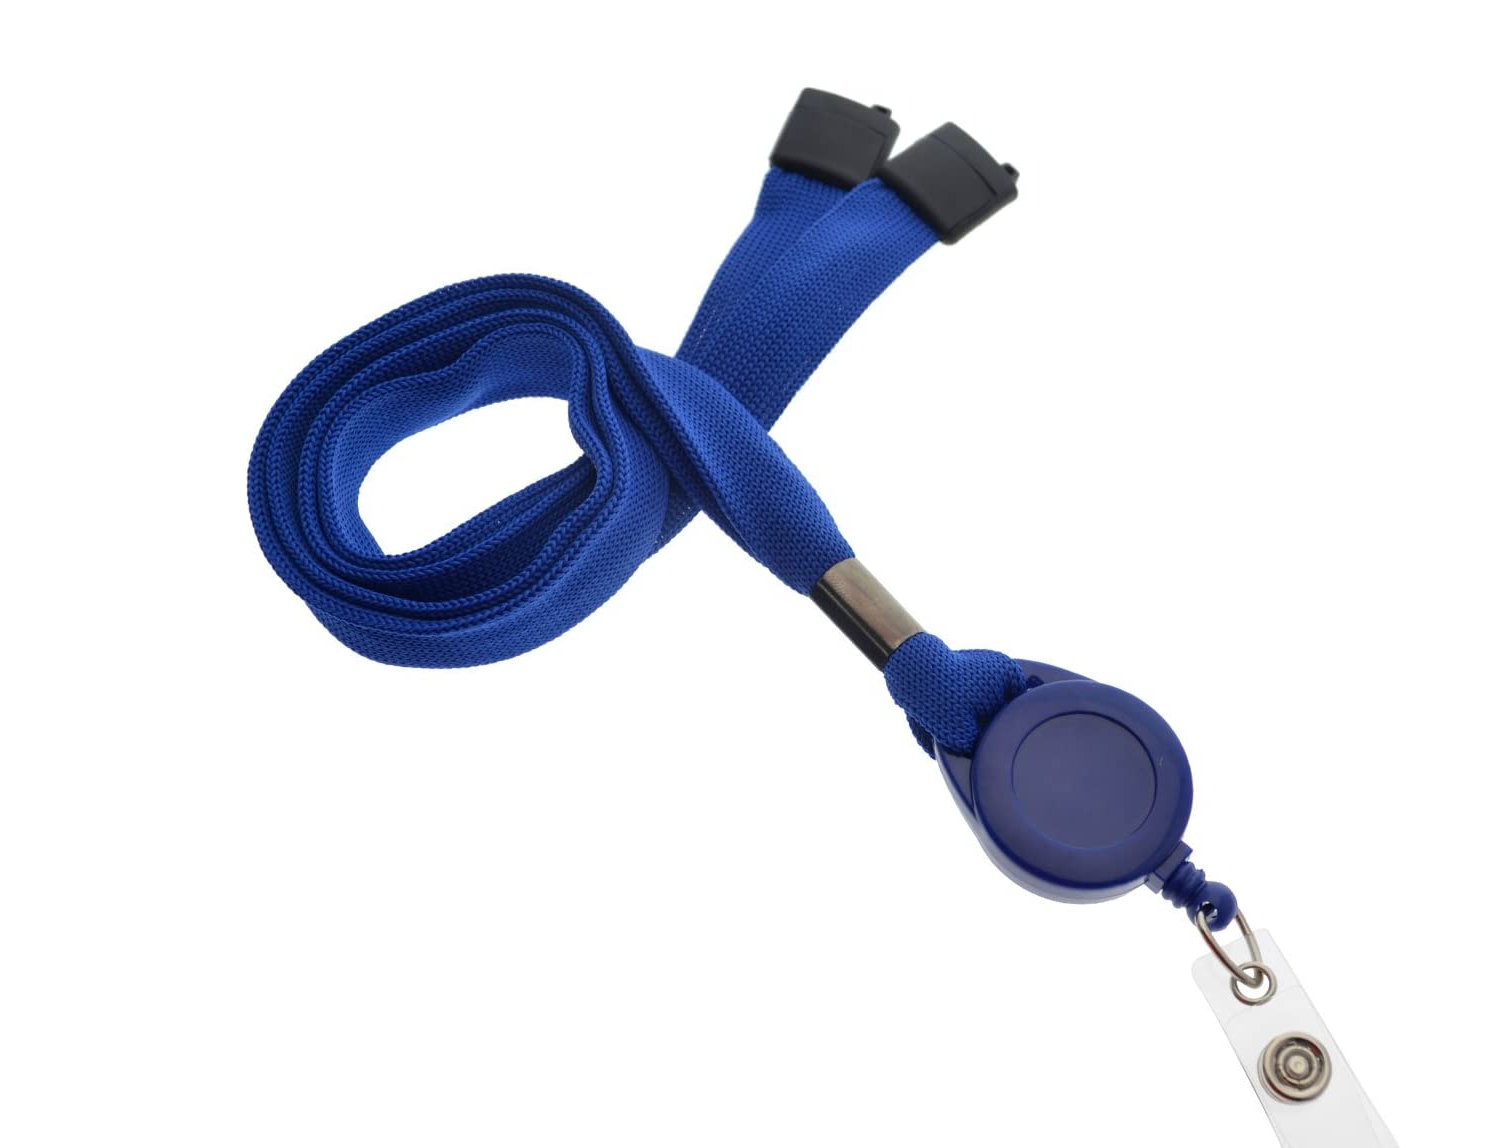 Royal Blue Retractable Badge Reel and Breakaway Lanyard Combo by Specialist  ID, Packaged and Sold Individually